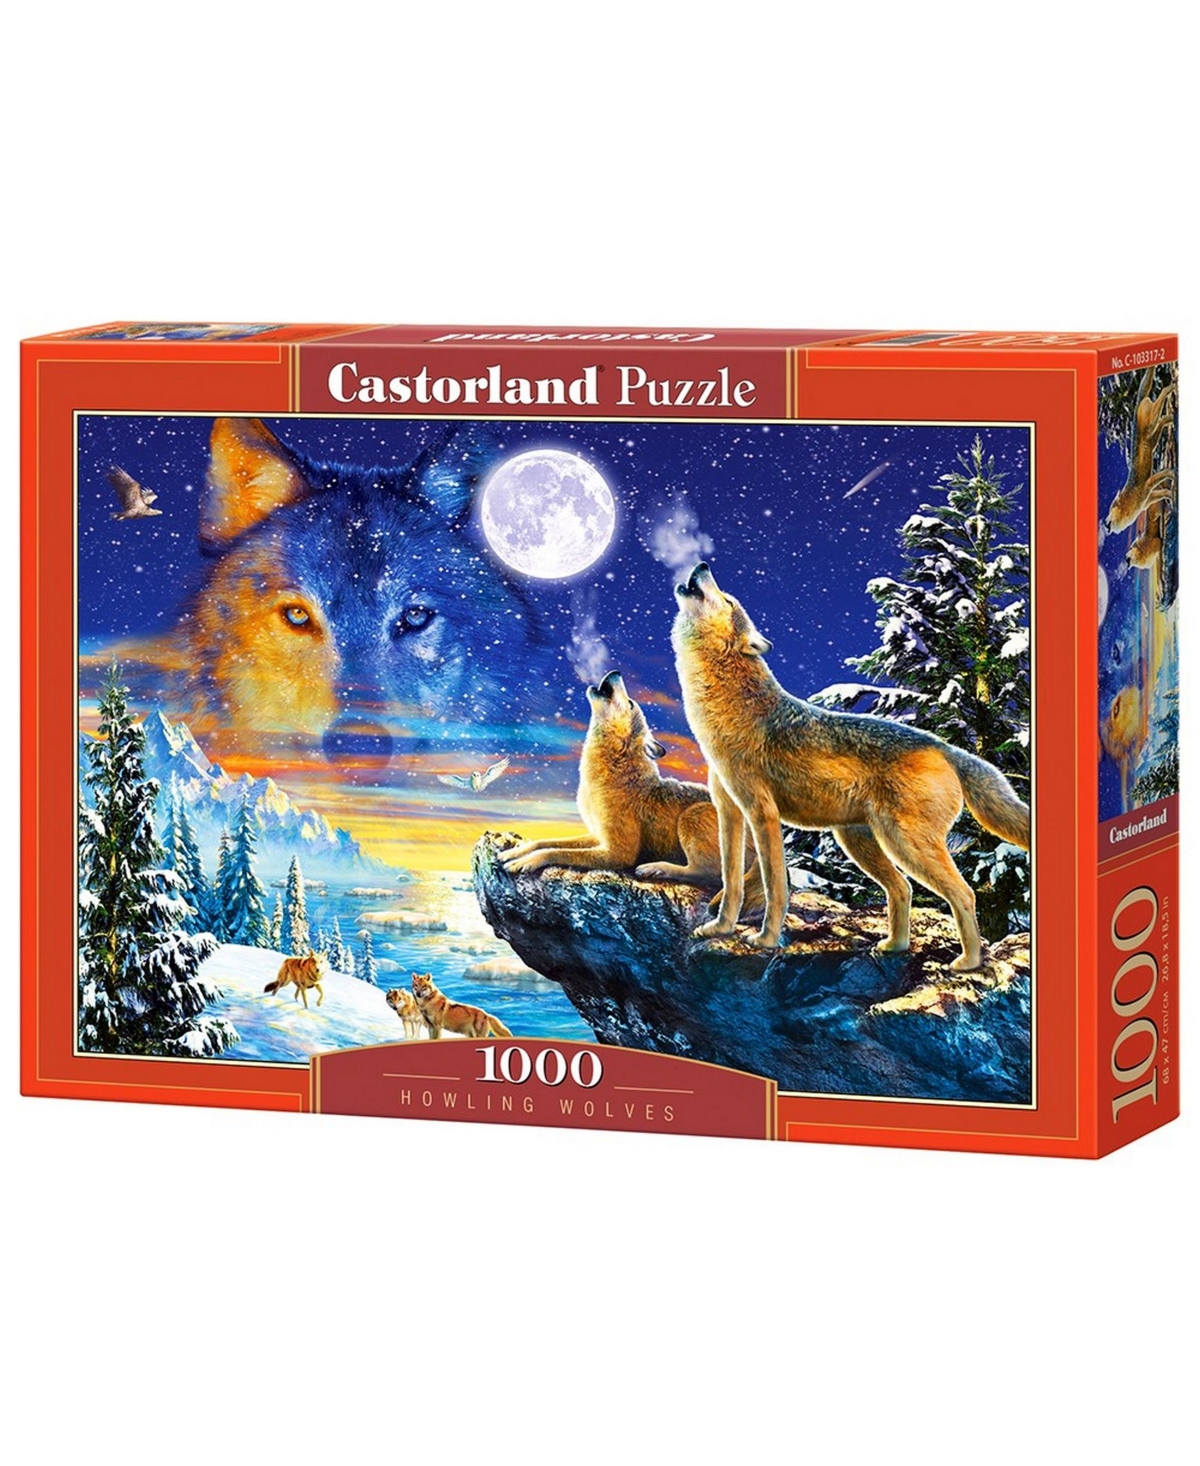 Castorland Howling Wolves Jigsaw Puzzle Set, 1000 Piece In Multicolor